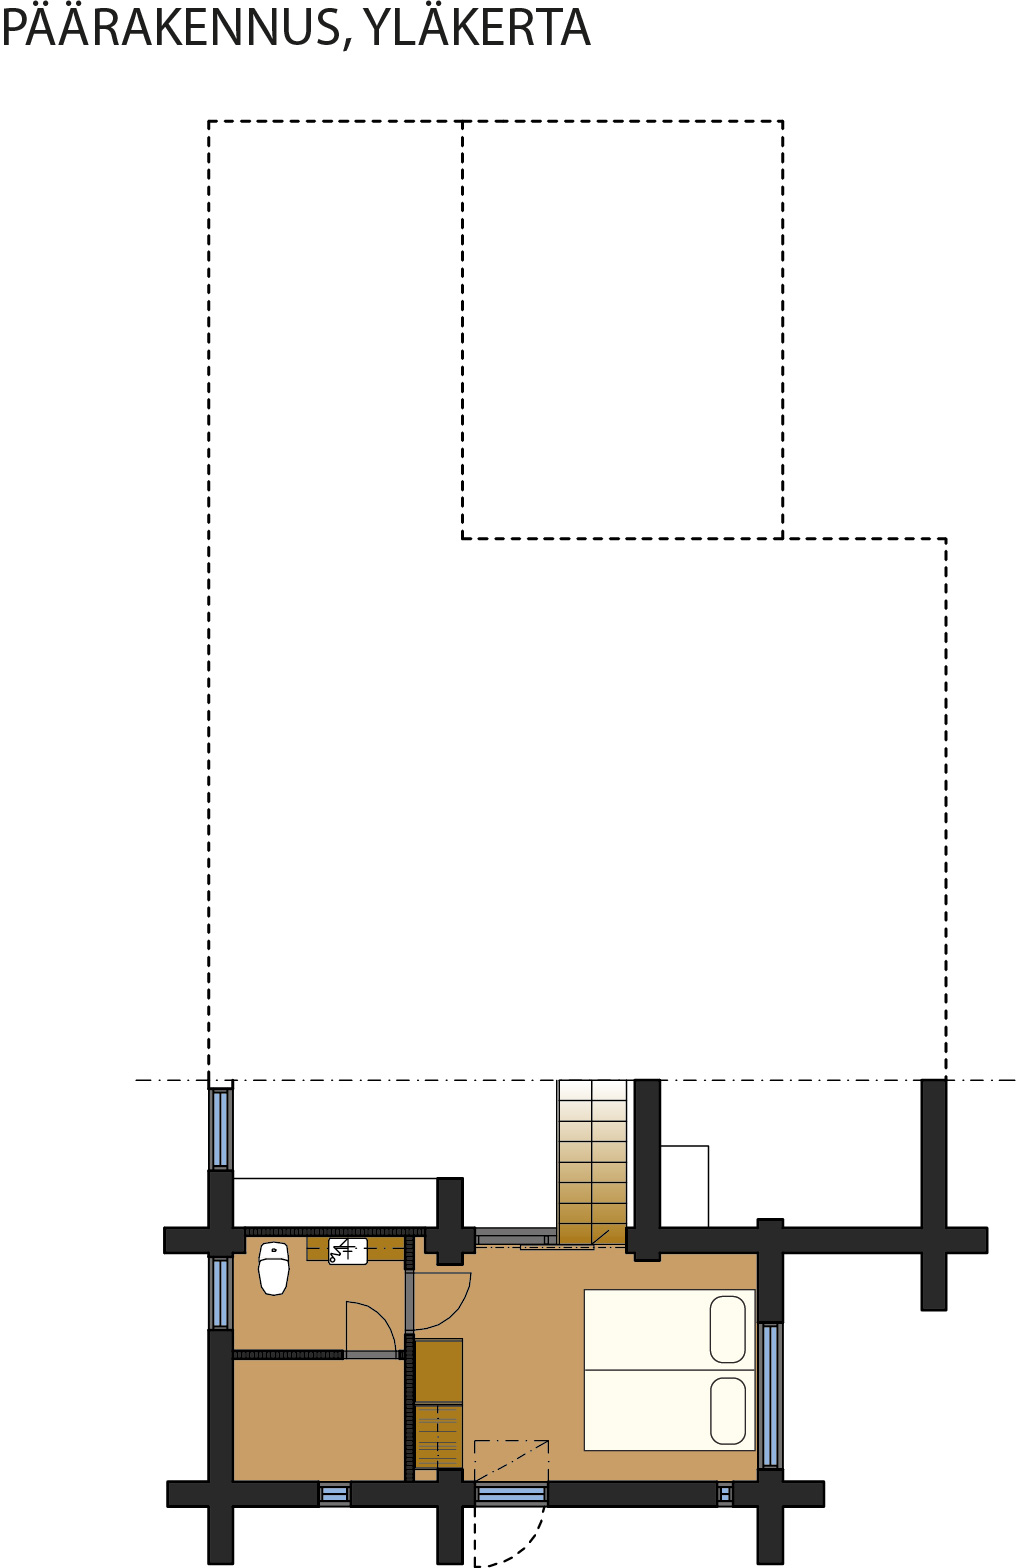 Main building Layout of 2nd floor